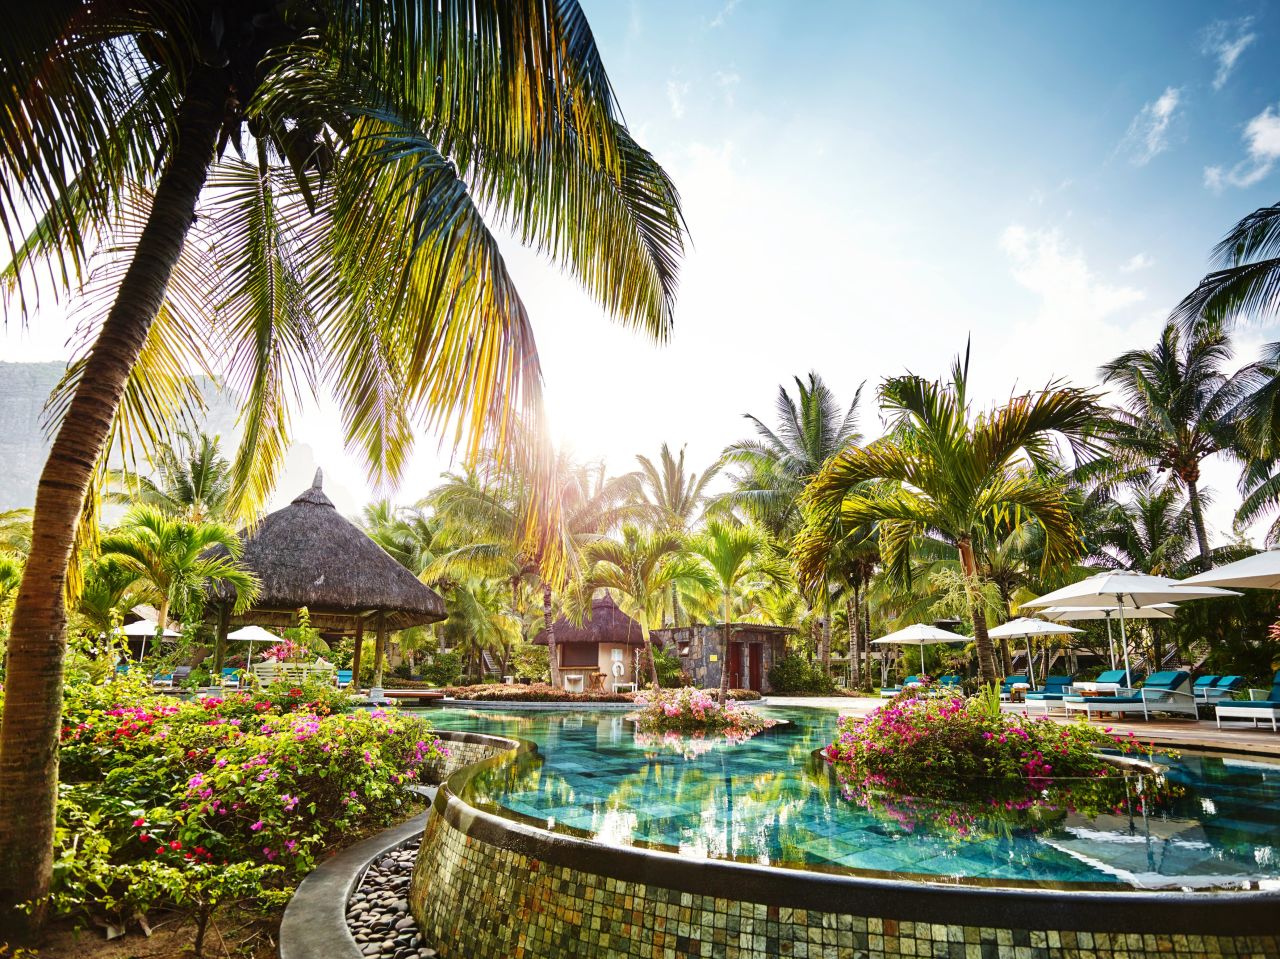 On one side of <a href="http://www.luxresorts.com/en/hotel-mauritius/luxlemorne?gclid=CK-d0oj9u80CFRG6Gwodb98P8Q" target="_blank" target="_blank">this hotel</a> guests can see the Le Morne mountain, and on the other, miles of sandy beach. The UNESCO World Heritage site is also known for its spectacular sunsets. 